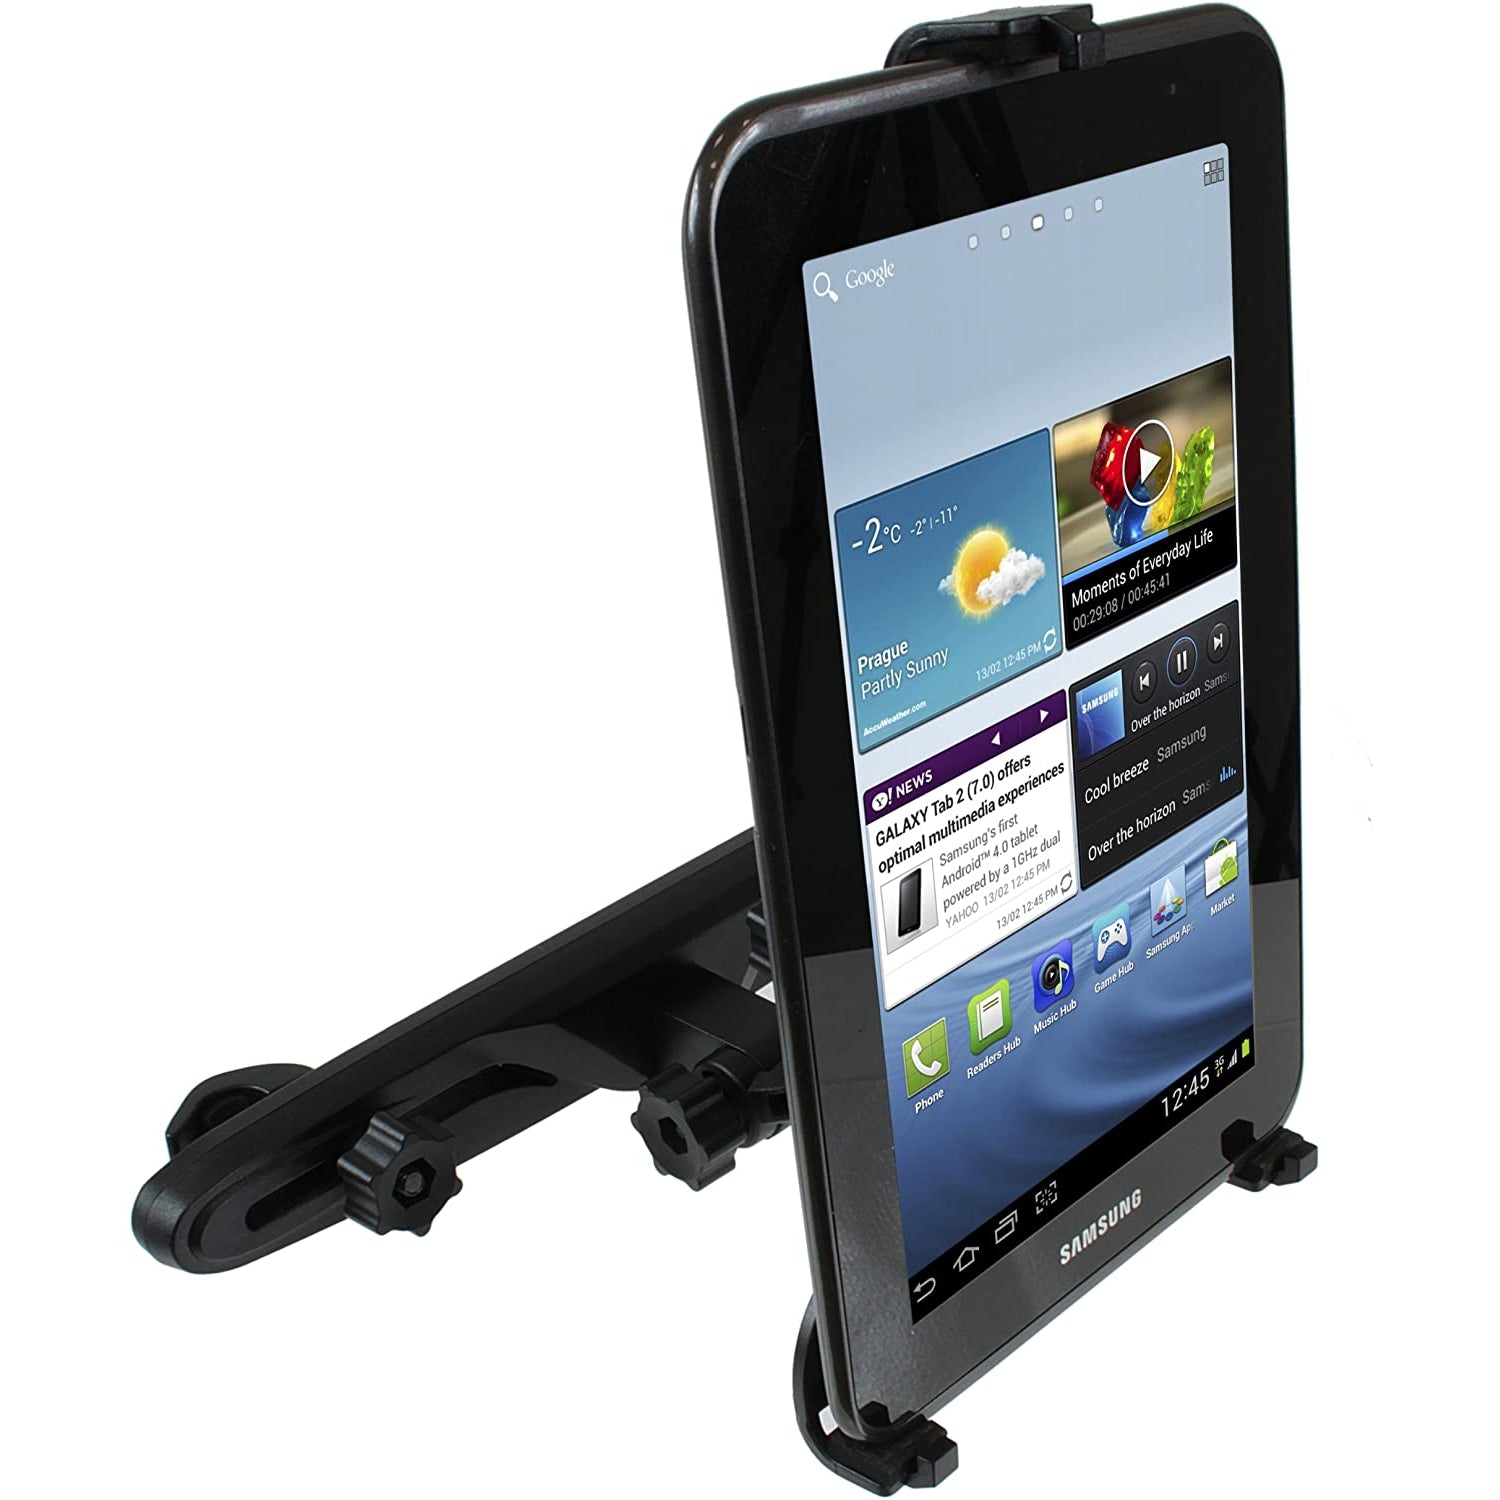 Kit Universal In-Car Tablet Headrest Mount for 7-10 Inch Tablets Compatible with iPad 2/3/4/Air/Mini, Samsung Galaxy Tab 2 7.0/8.0/10.1 Inch